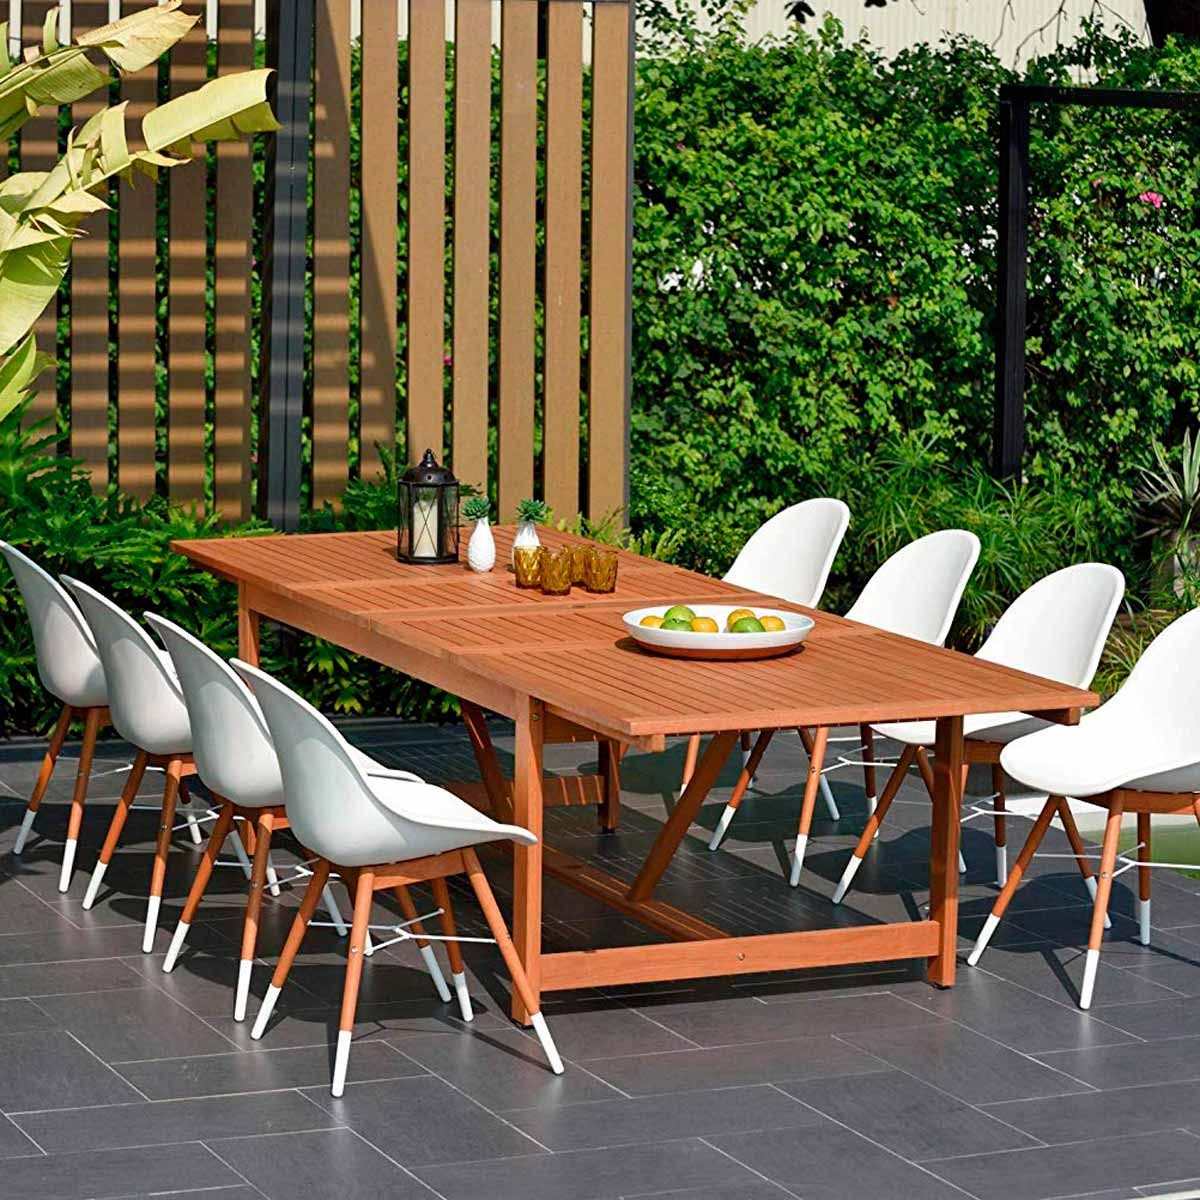 Patio Dining Sets Buying Guide | Family Handyman